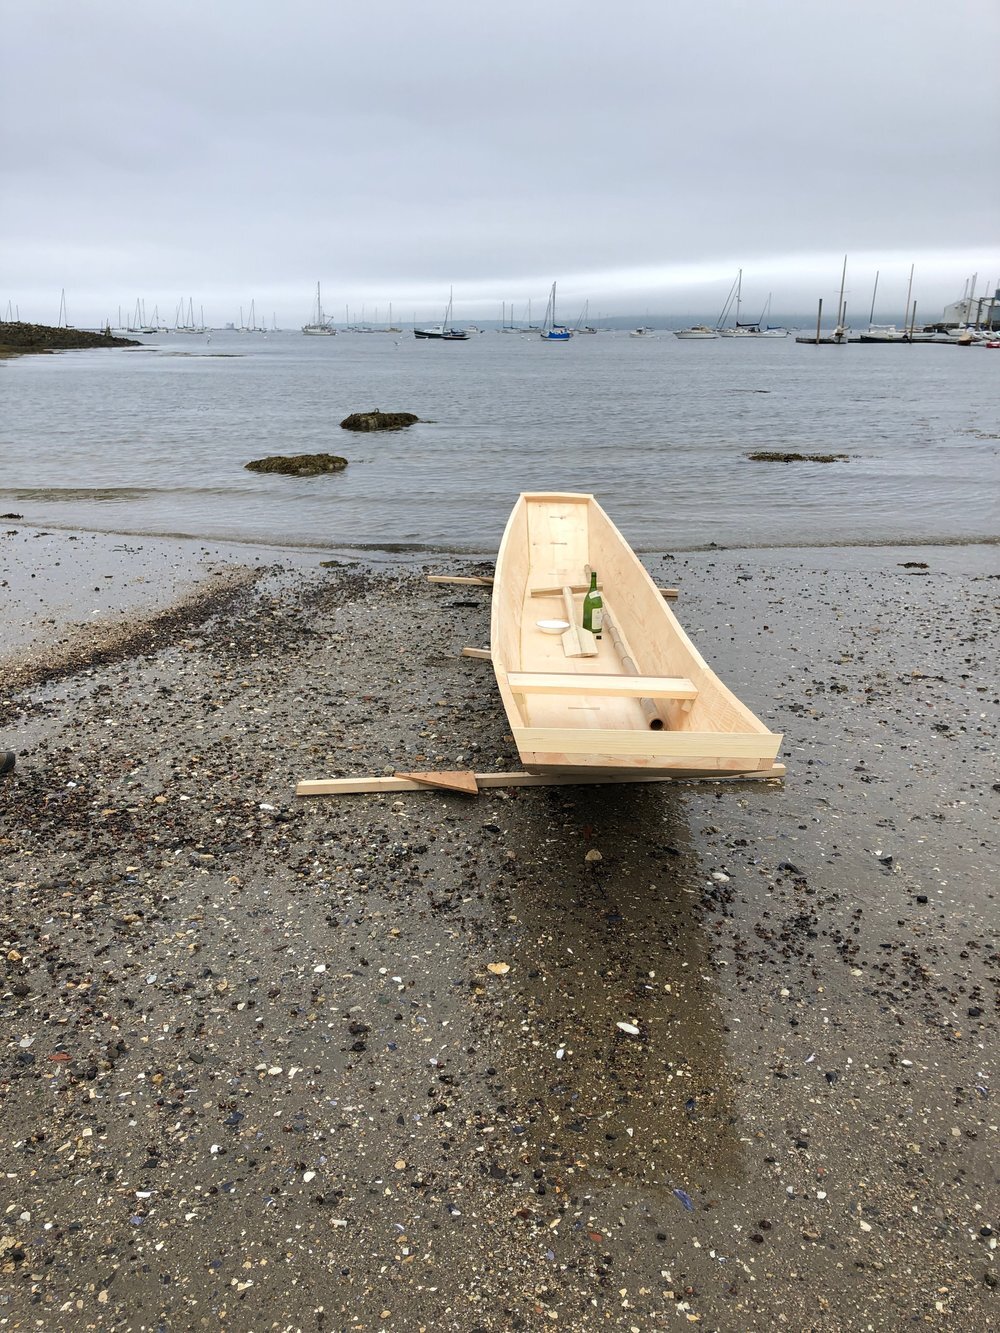  The completed boat waiting to be launched! 